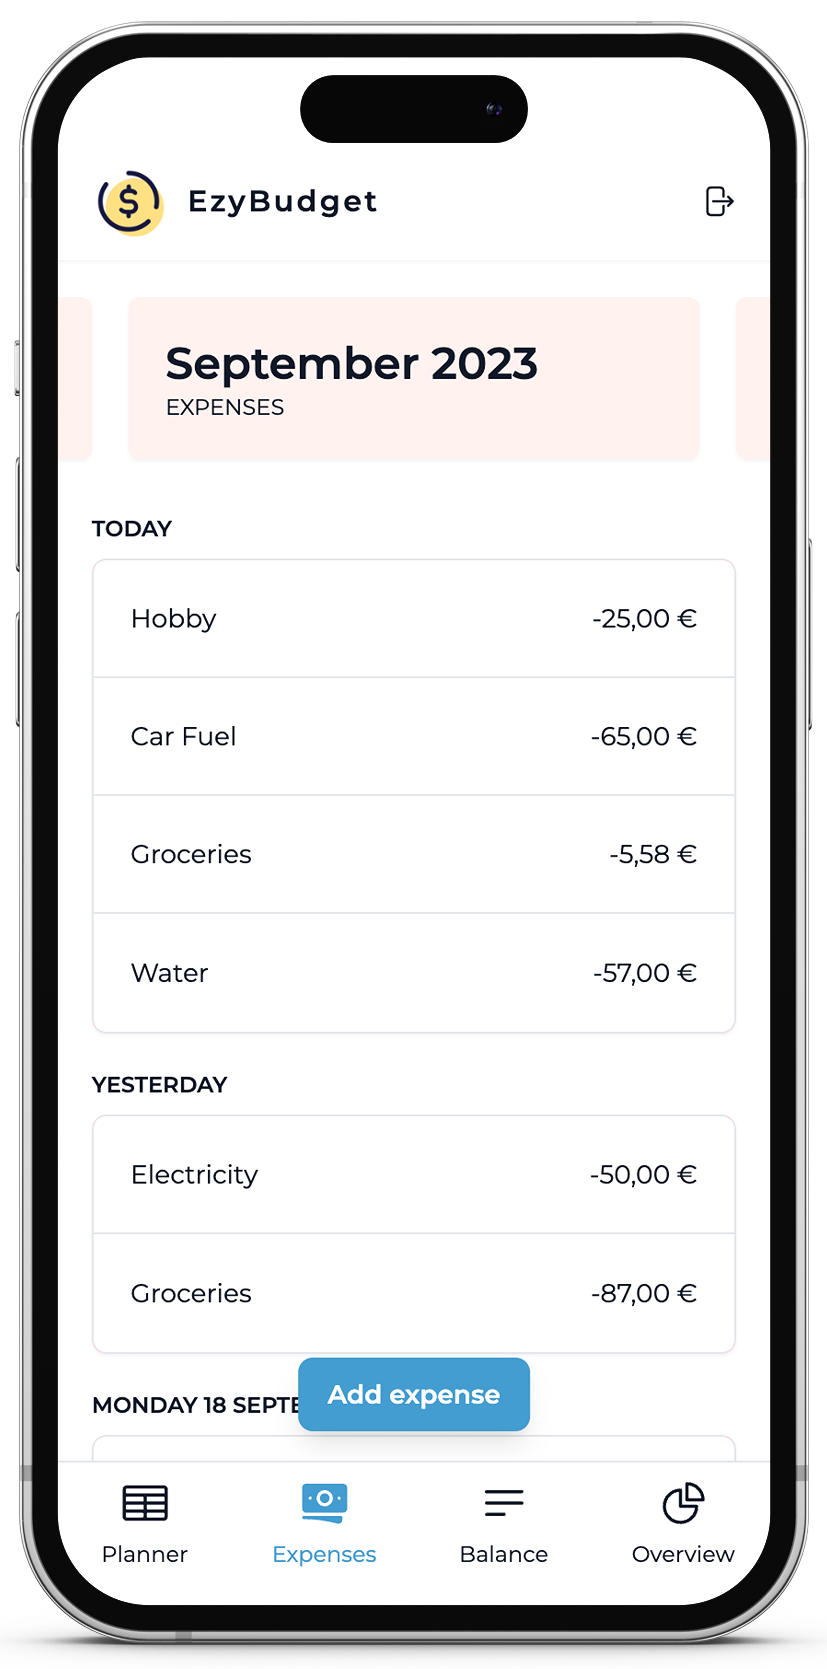 Add expenses from any device